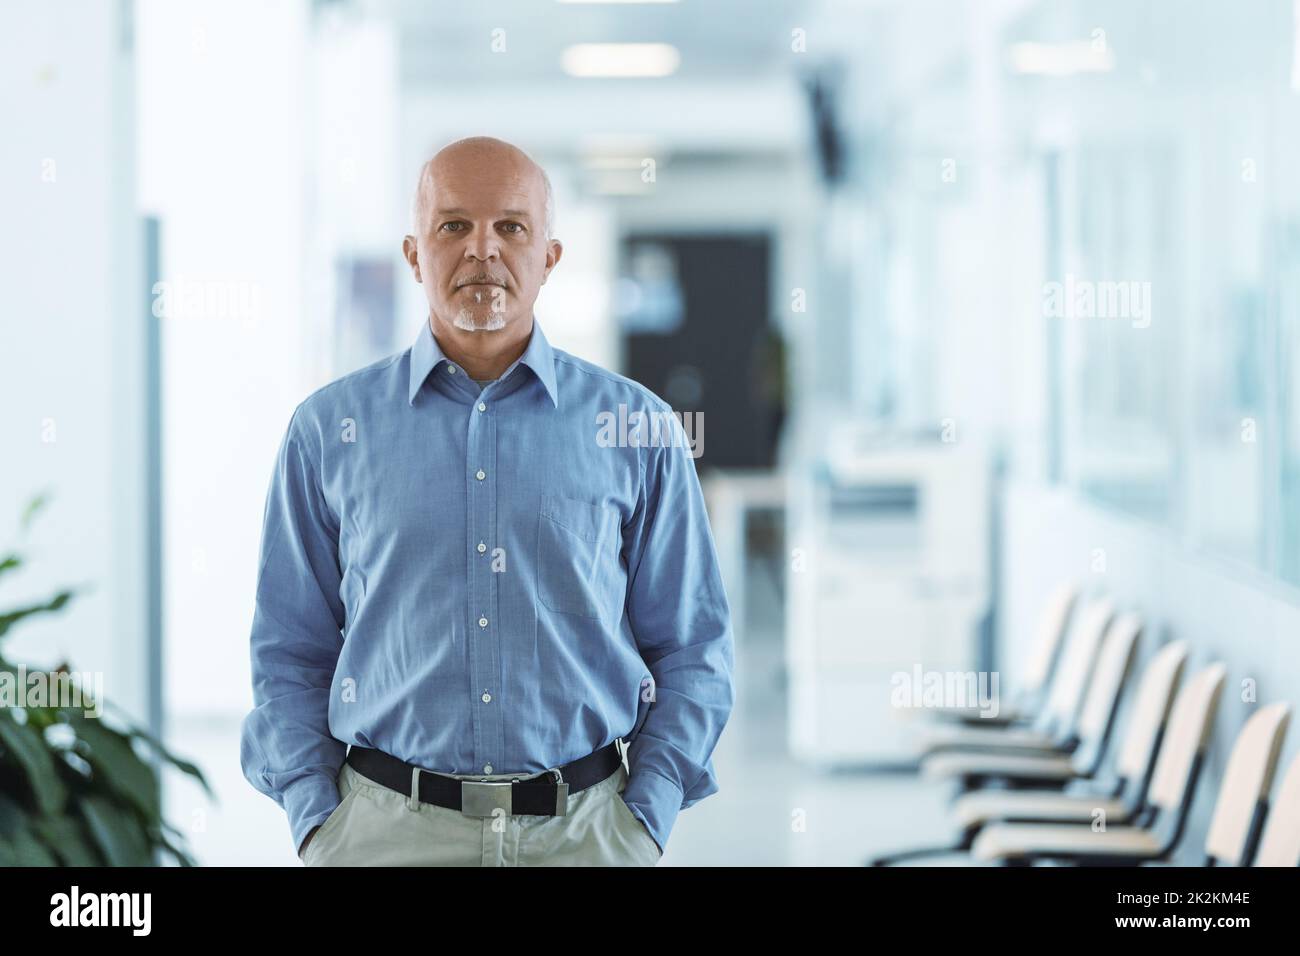 senior man standing and facing the camera with hands in pocket Stock Photo